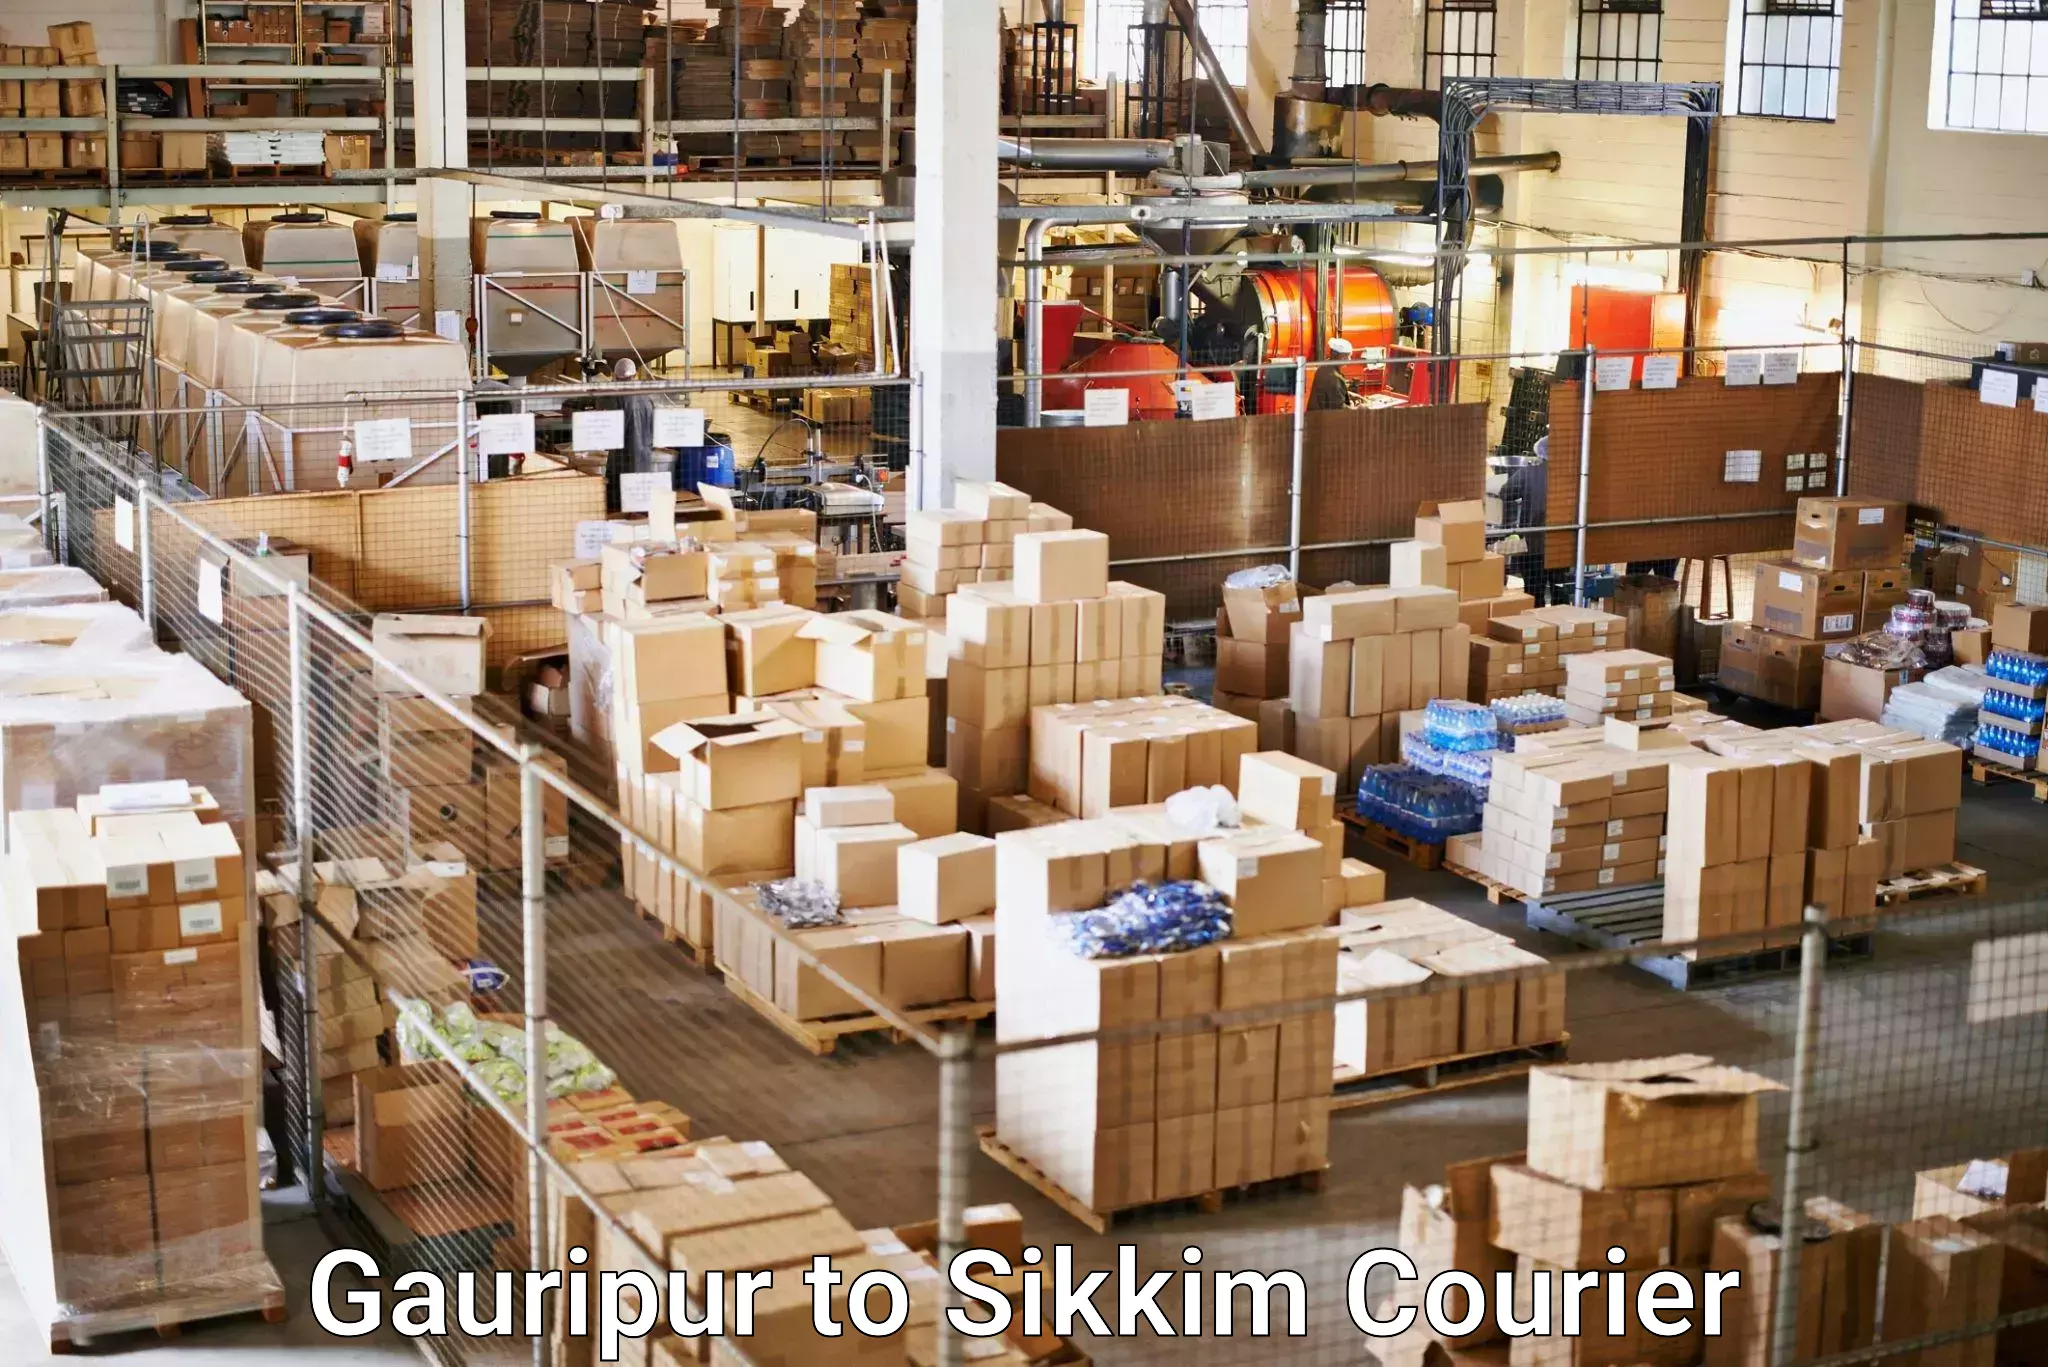 Express delivery capabilities Gauripur to South Sikkim